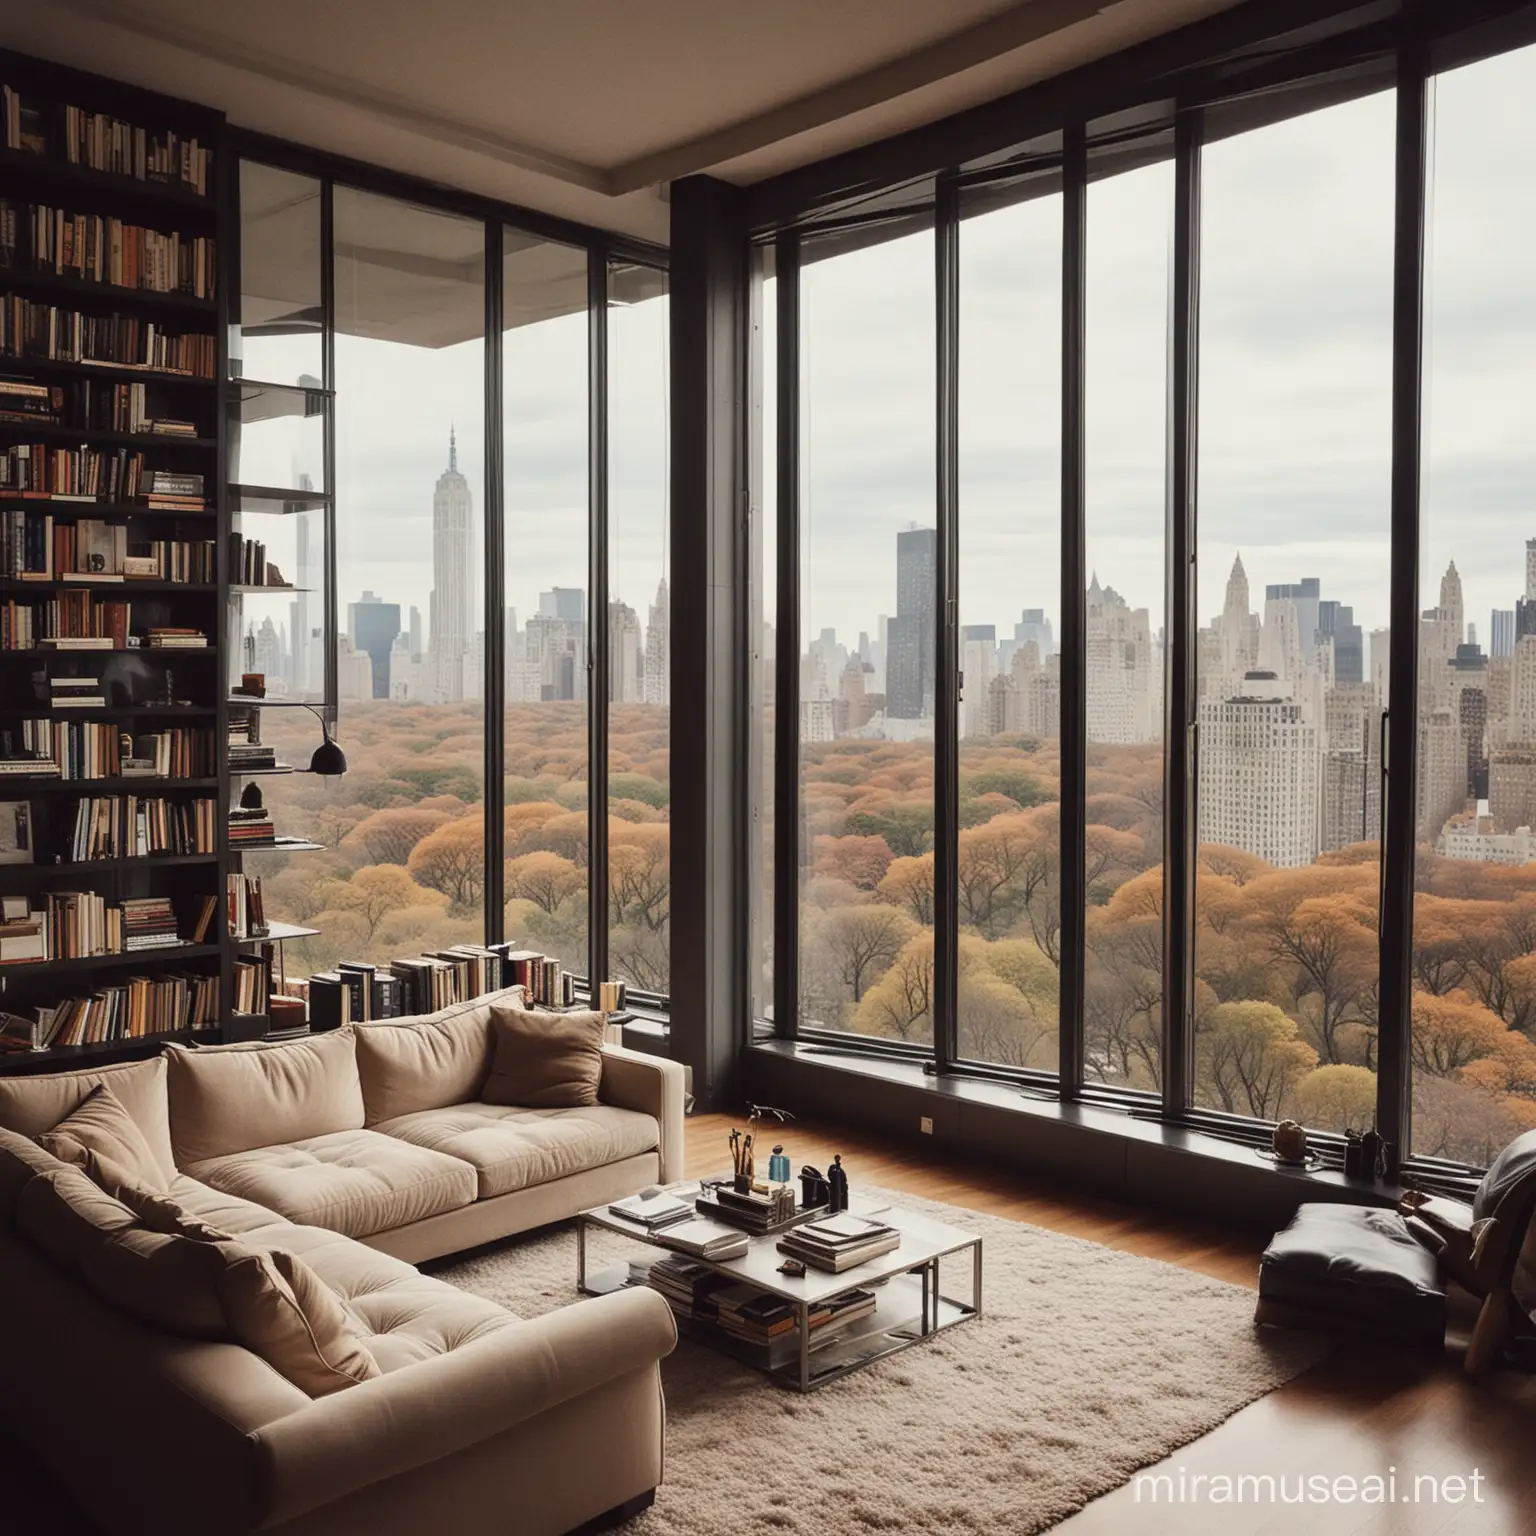 I want a man in a skyscraper apartment in front of a glass window, overlooking central park and turning to look back from where the camera lens sees him.On the wall of the apartment to have paintings and a large library full of books. The apartment should look luxurious and the person himself should look like a successful businessman.